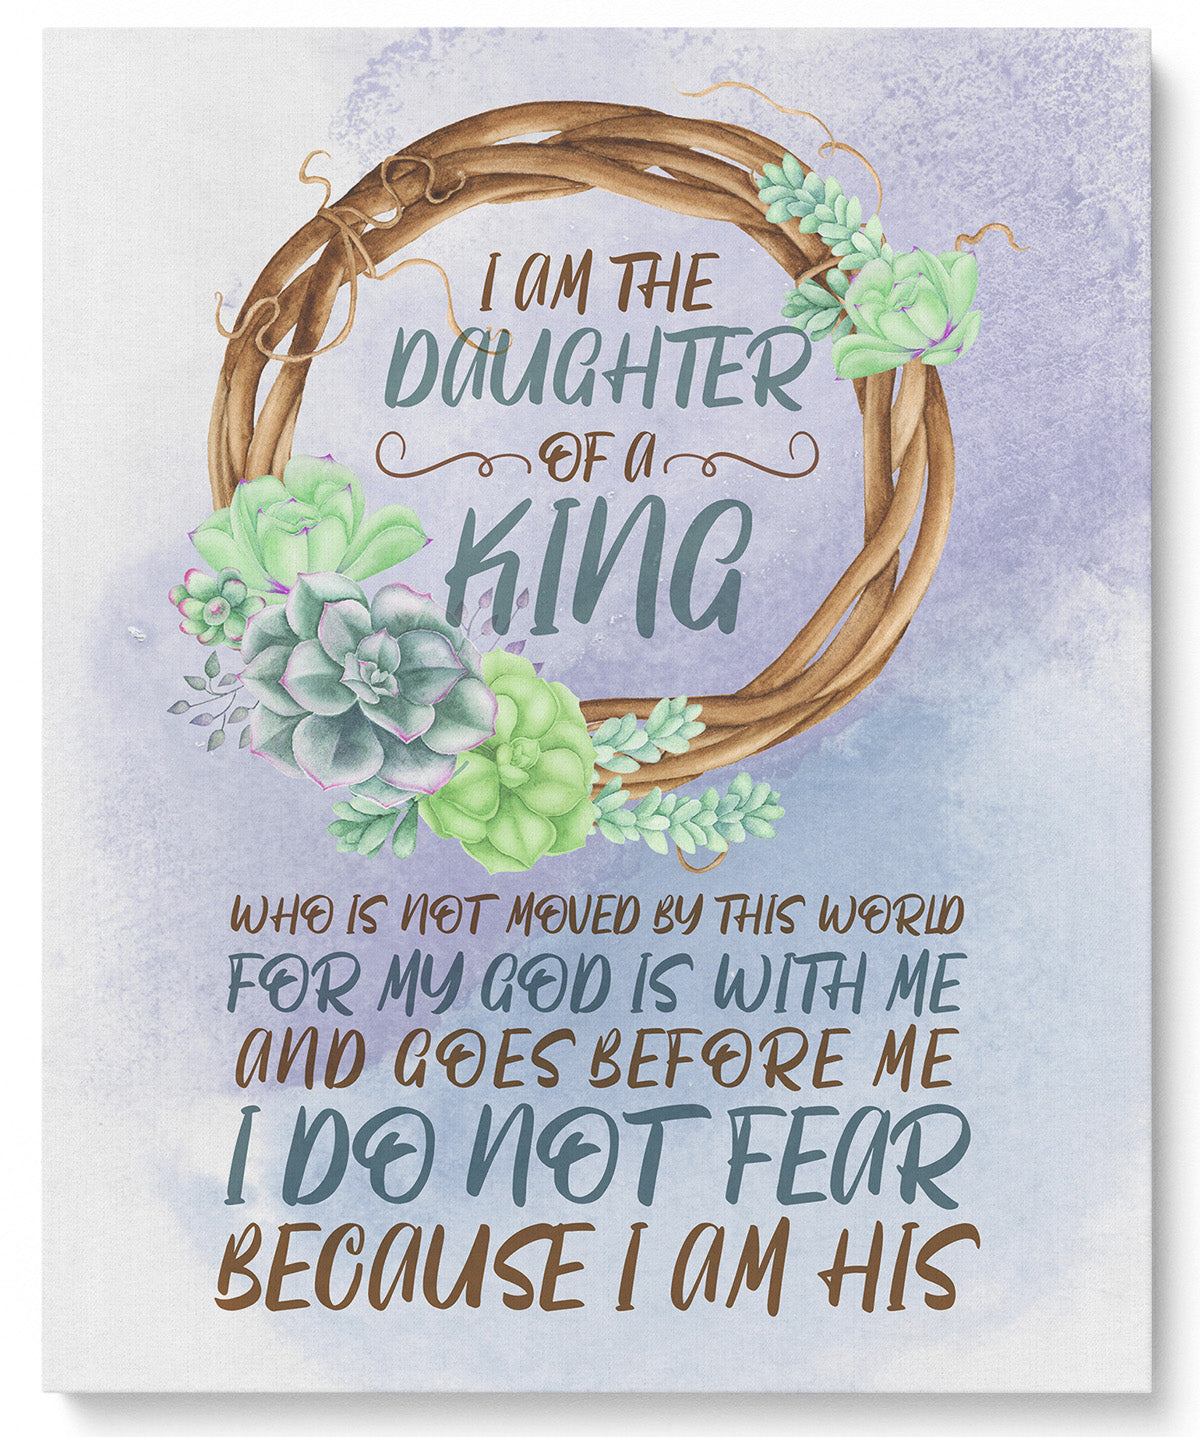 I Am The Daughter Of A King Religious Wall Decor - Christian Bible Verse Wall Art - Bedroom Aesthetic Home Decor - Gift for Women Girls Teen Tweens